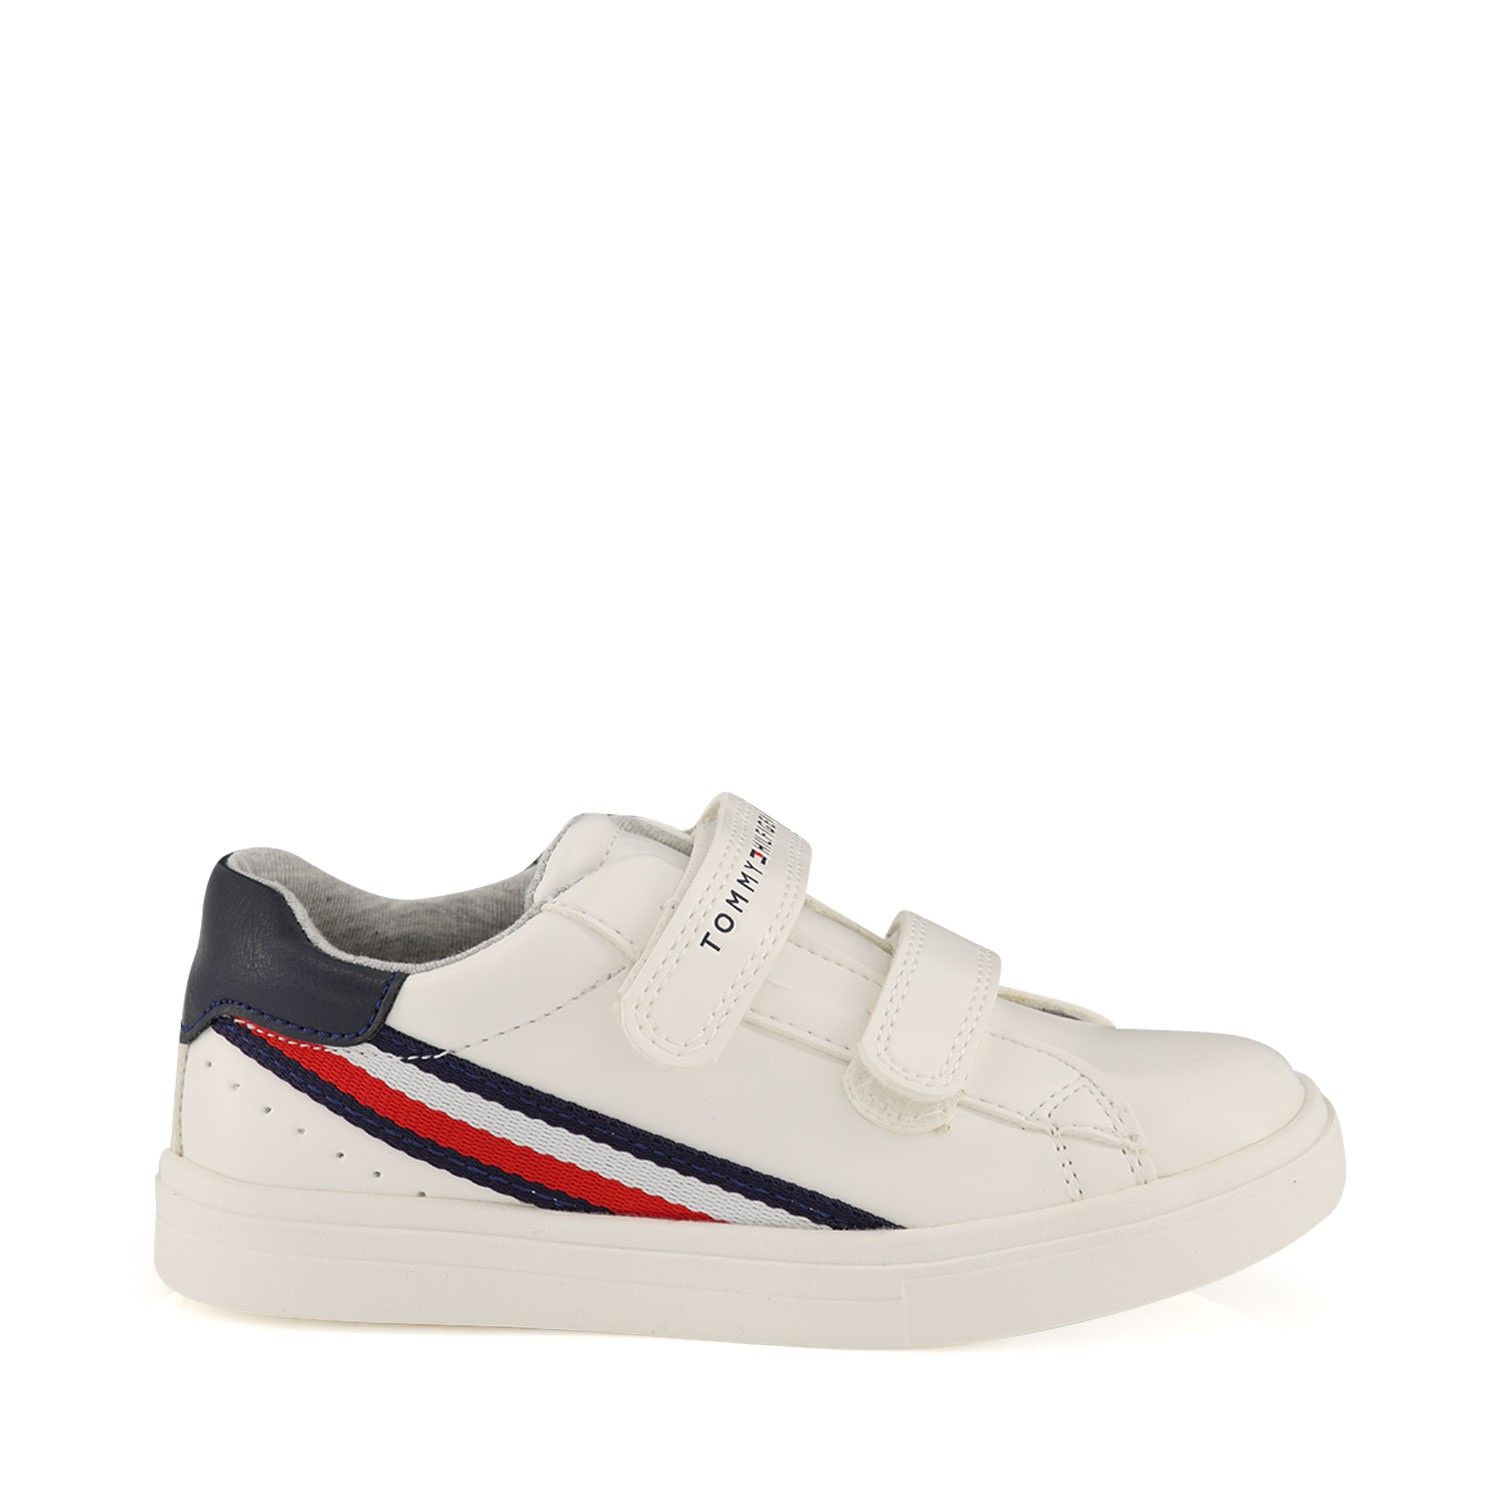 tommy shoes kids